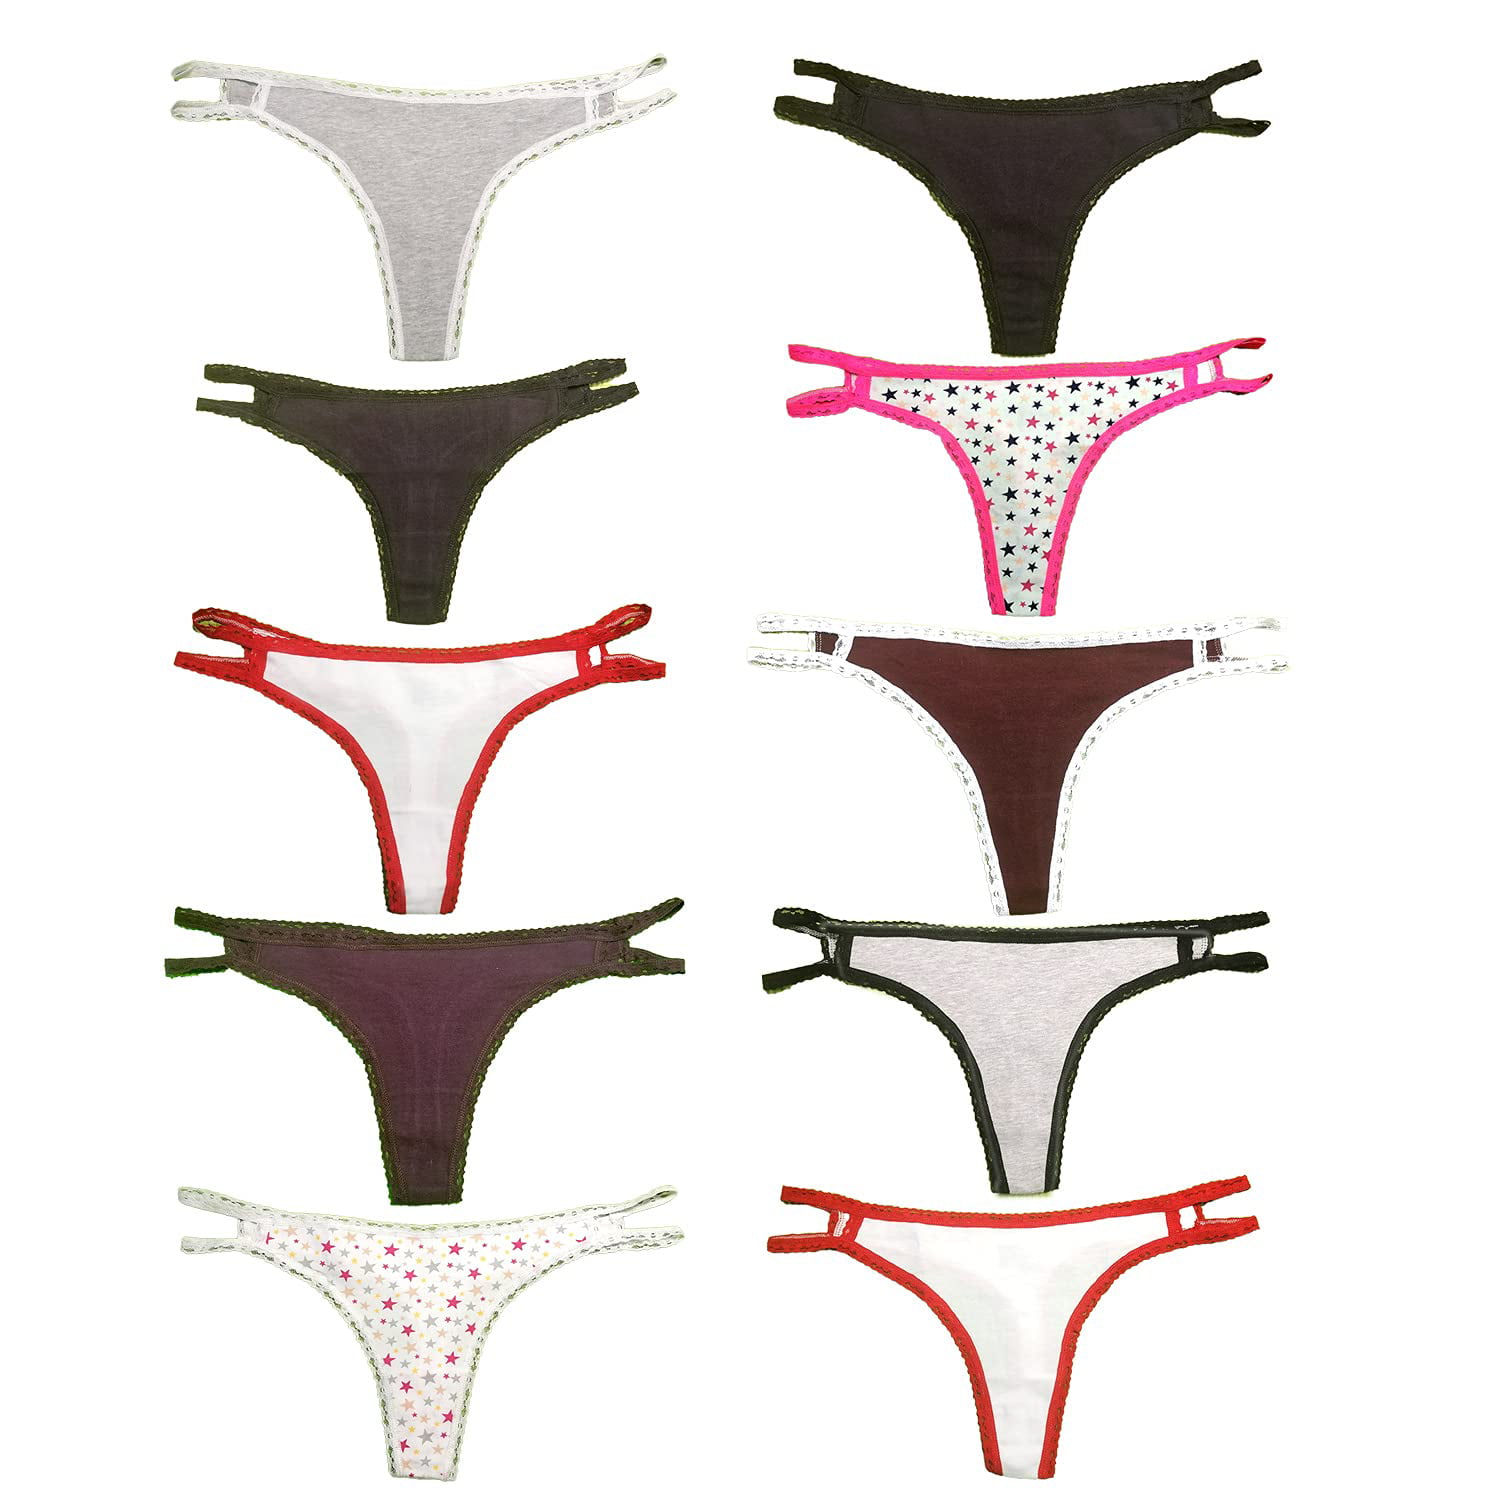 White Ivy Women's String Bikini Underwear - 12 piece Multi Pack - No Panty  Line Pinch Free Comfy Cool Colorful at  Women's Clothing store